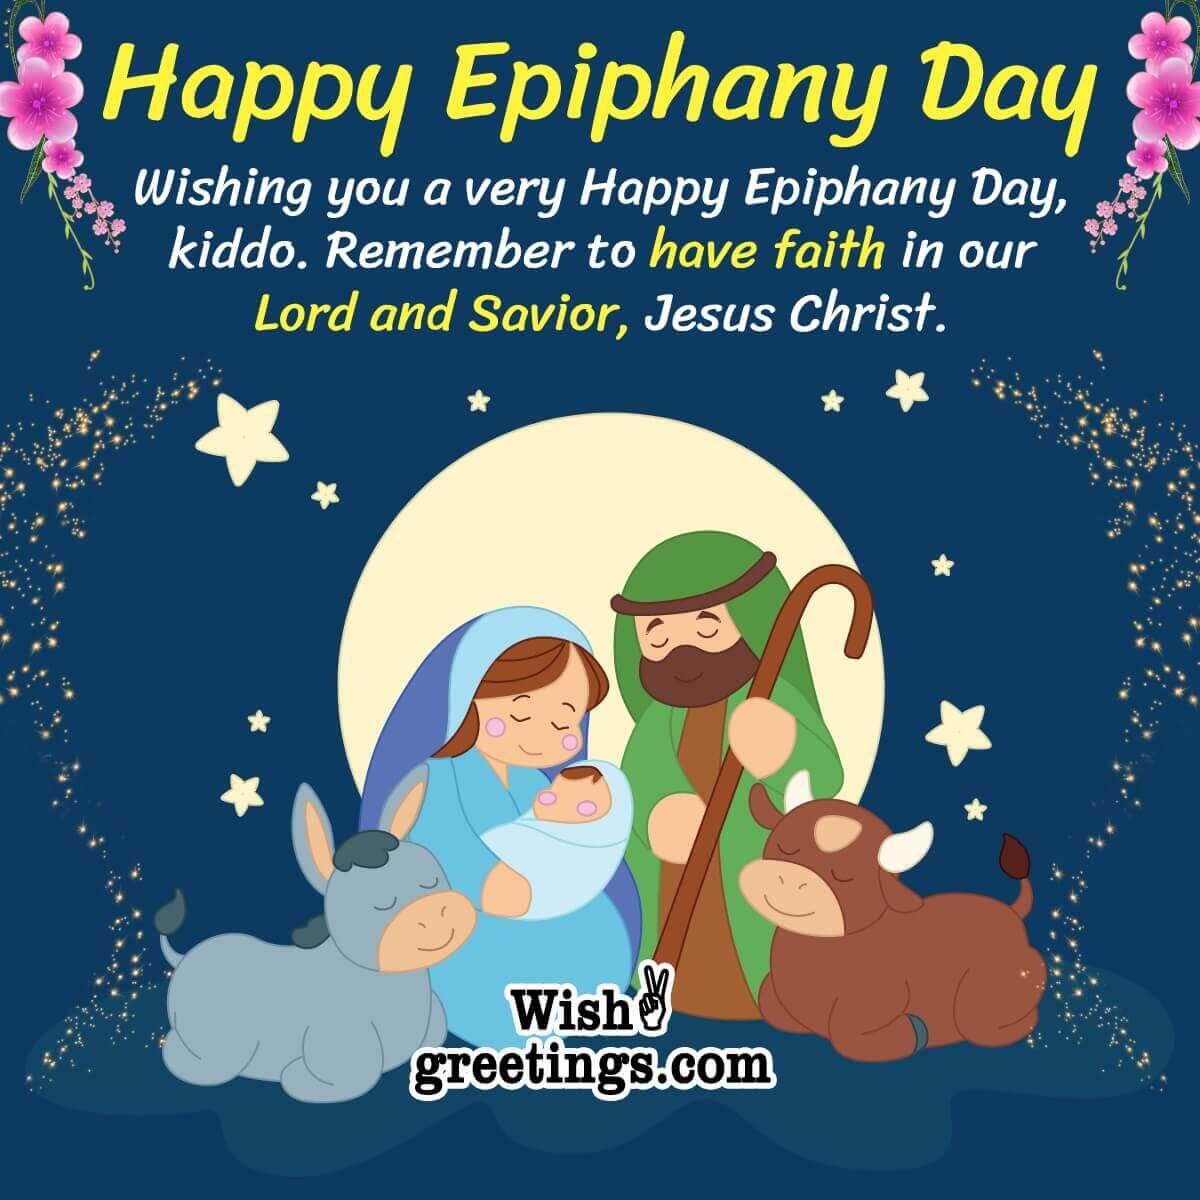 Happy Epiphany Day Wish Image For Kid